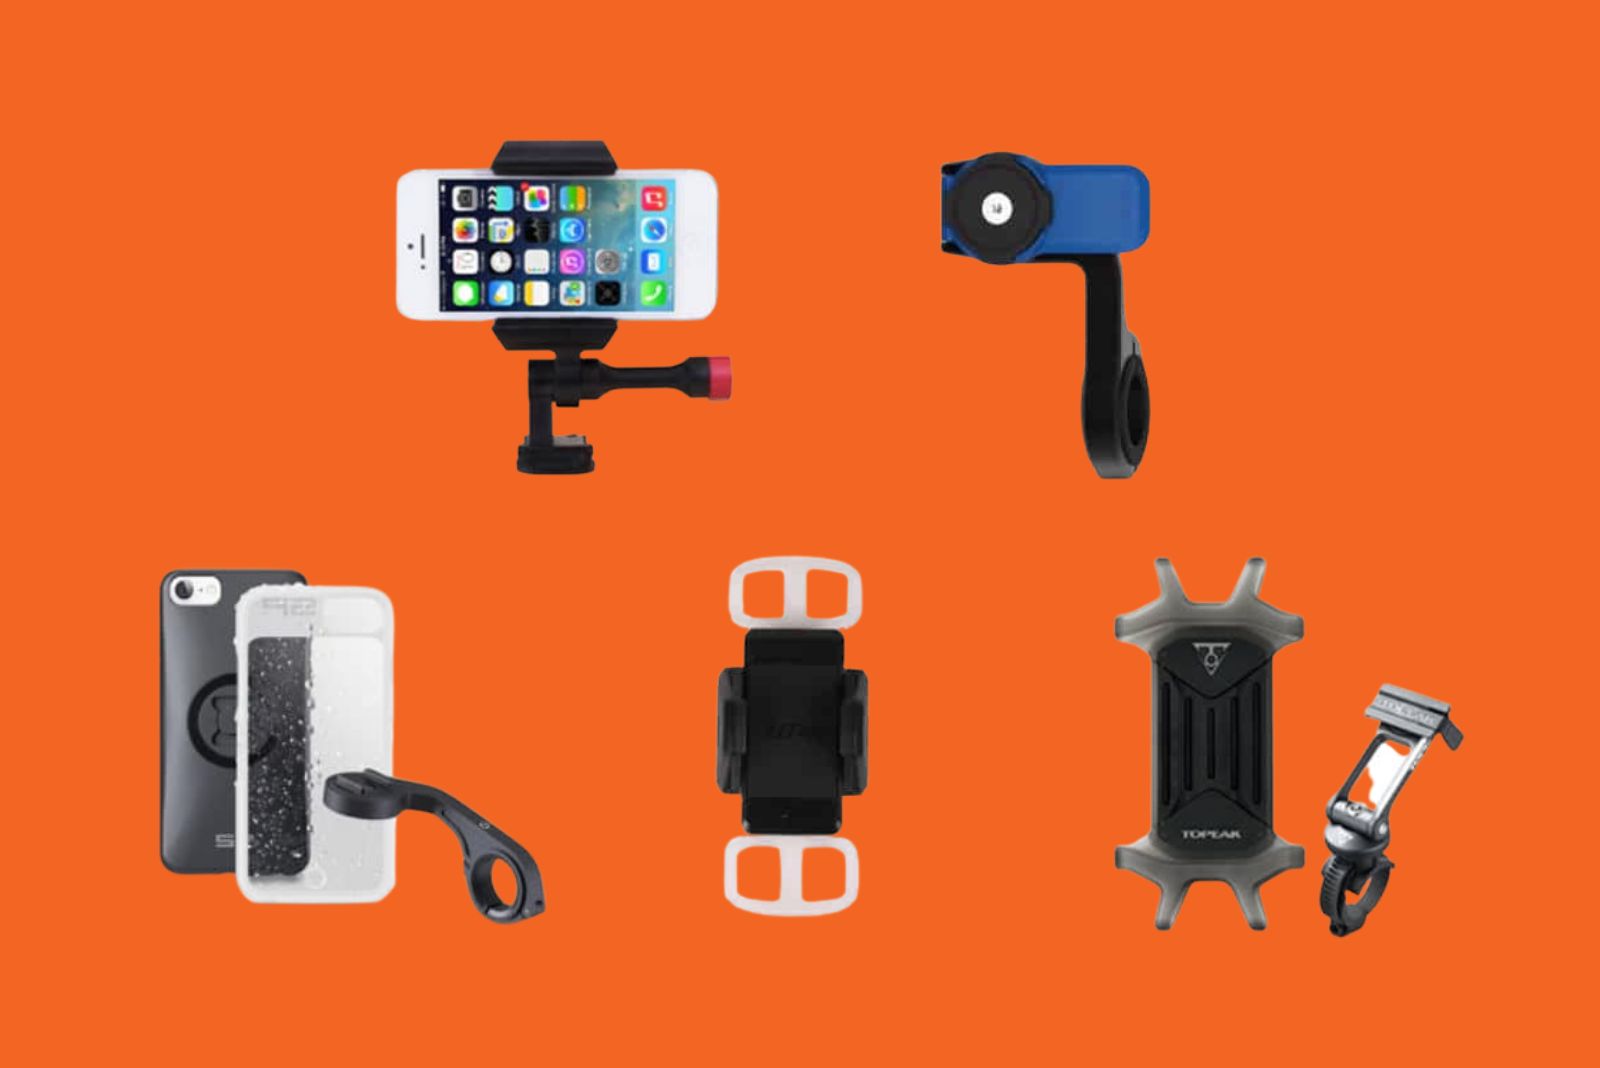 Mighty Mount Offers The Largest Selection of Cup Holder Phone